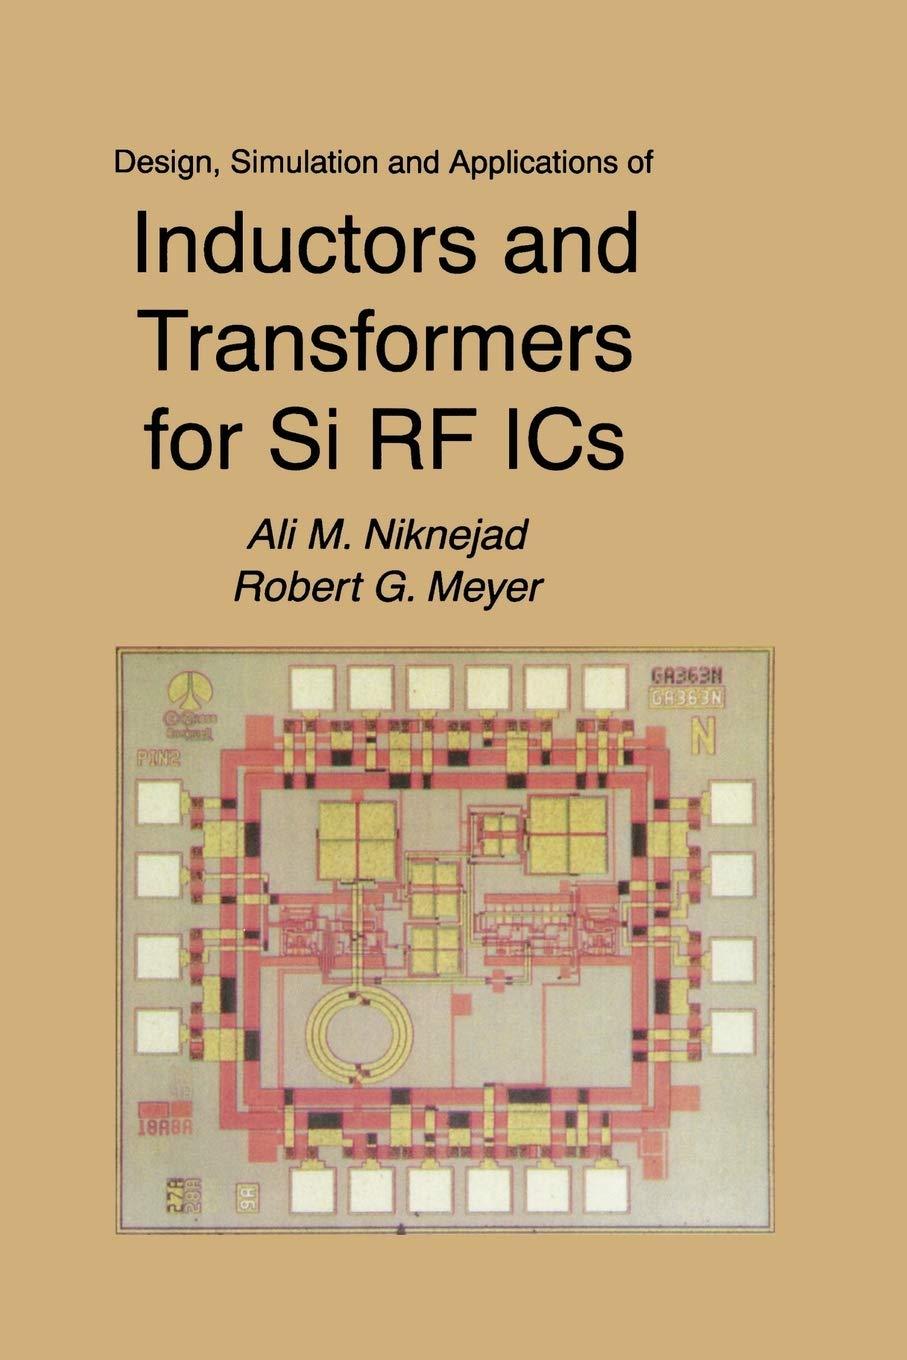 design simulation and applications of inductors and transformers for si rf ics 2000 edition ali m. niknejad,